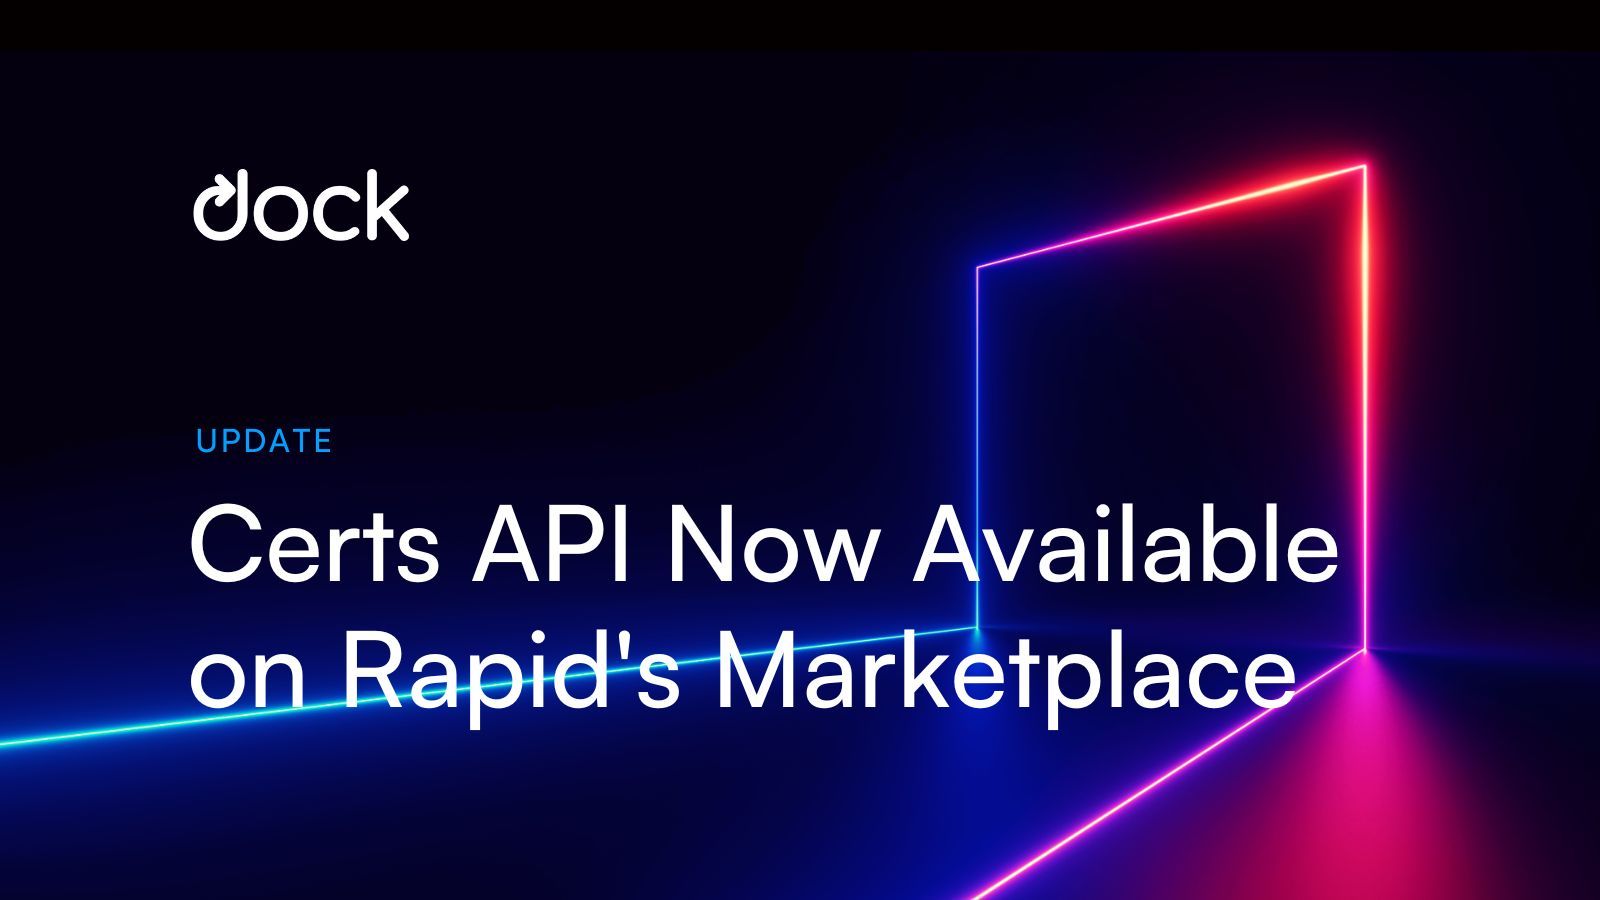 Dock Certs API Is Now Available on Rapid’s Marketplace, the World’s Largest API Hub